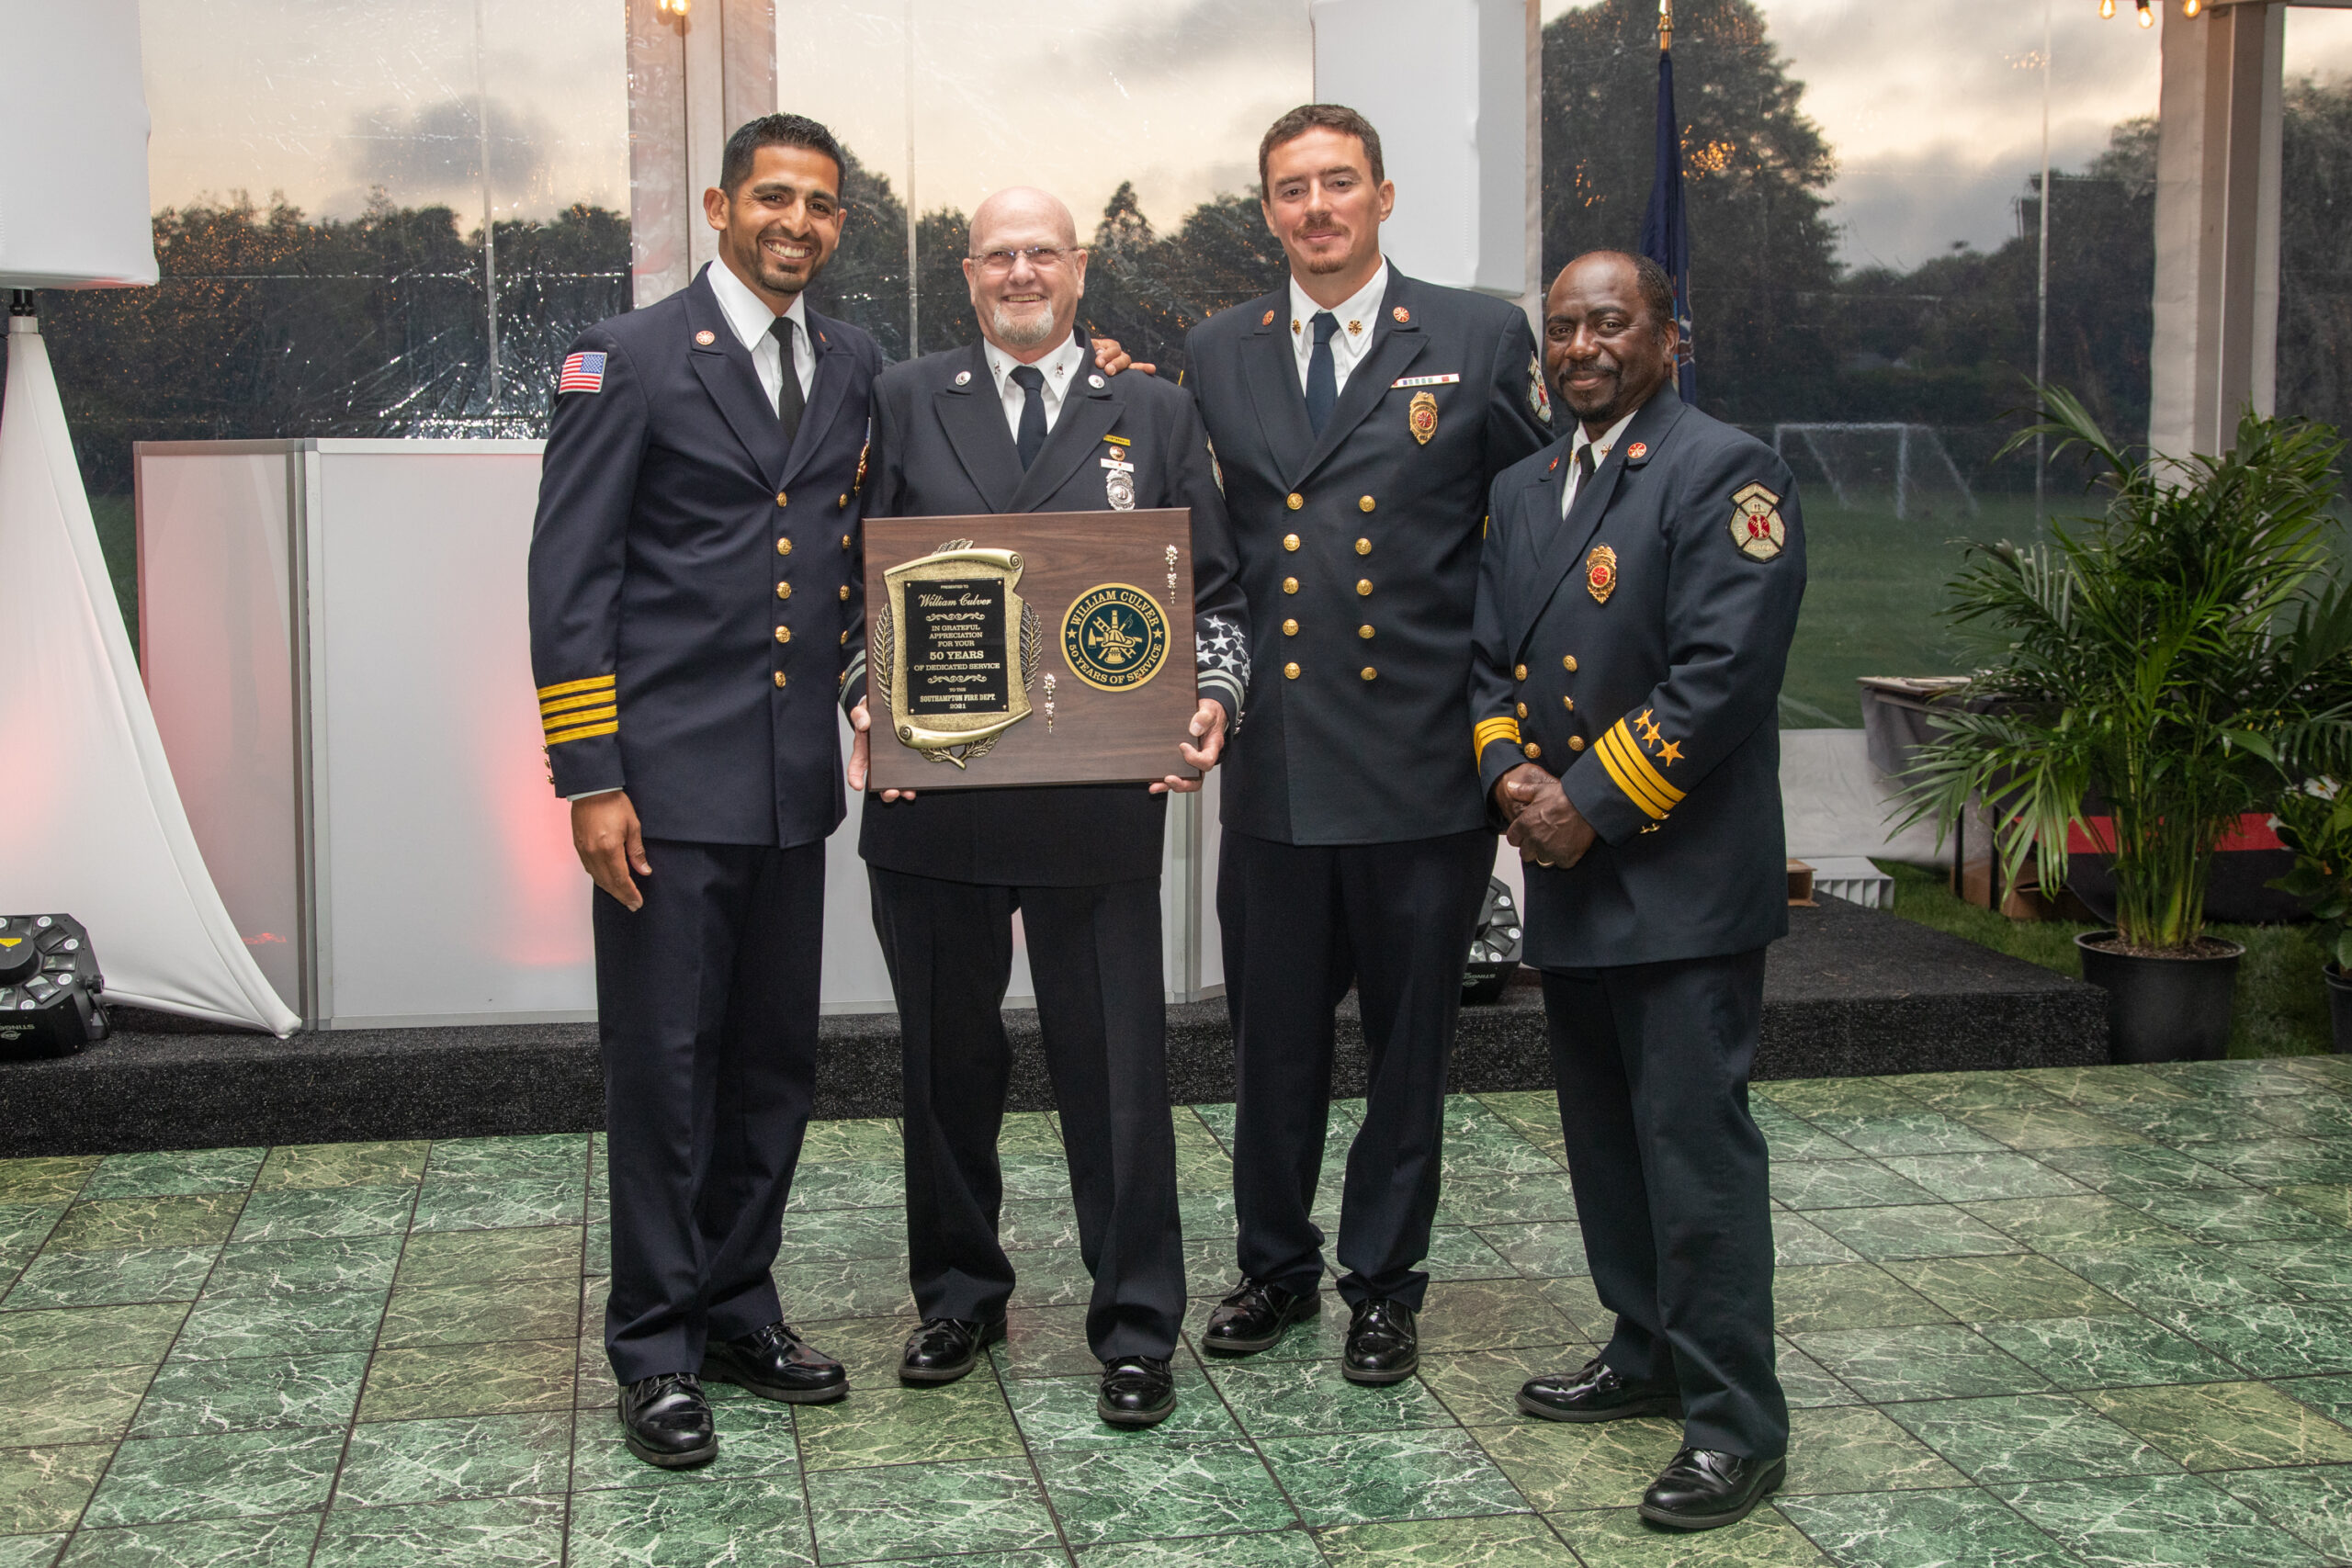 Southampton Fire Department honored two longtime members for 50 years of service -- William Culver and Roy Wines III -- at its annual dinner in June. From left, First Assistant Chief Manny Escobar, William Culver, Chief Alfred Callahan and Second Assistant Chief Polis Walker. COURTESY SOUTHAMPTON FIRE DEPARTMENT.